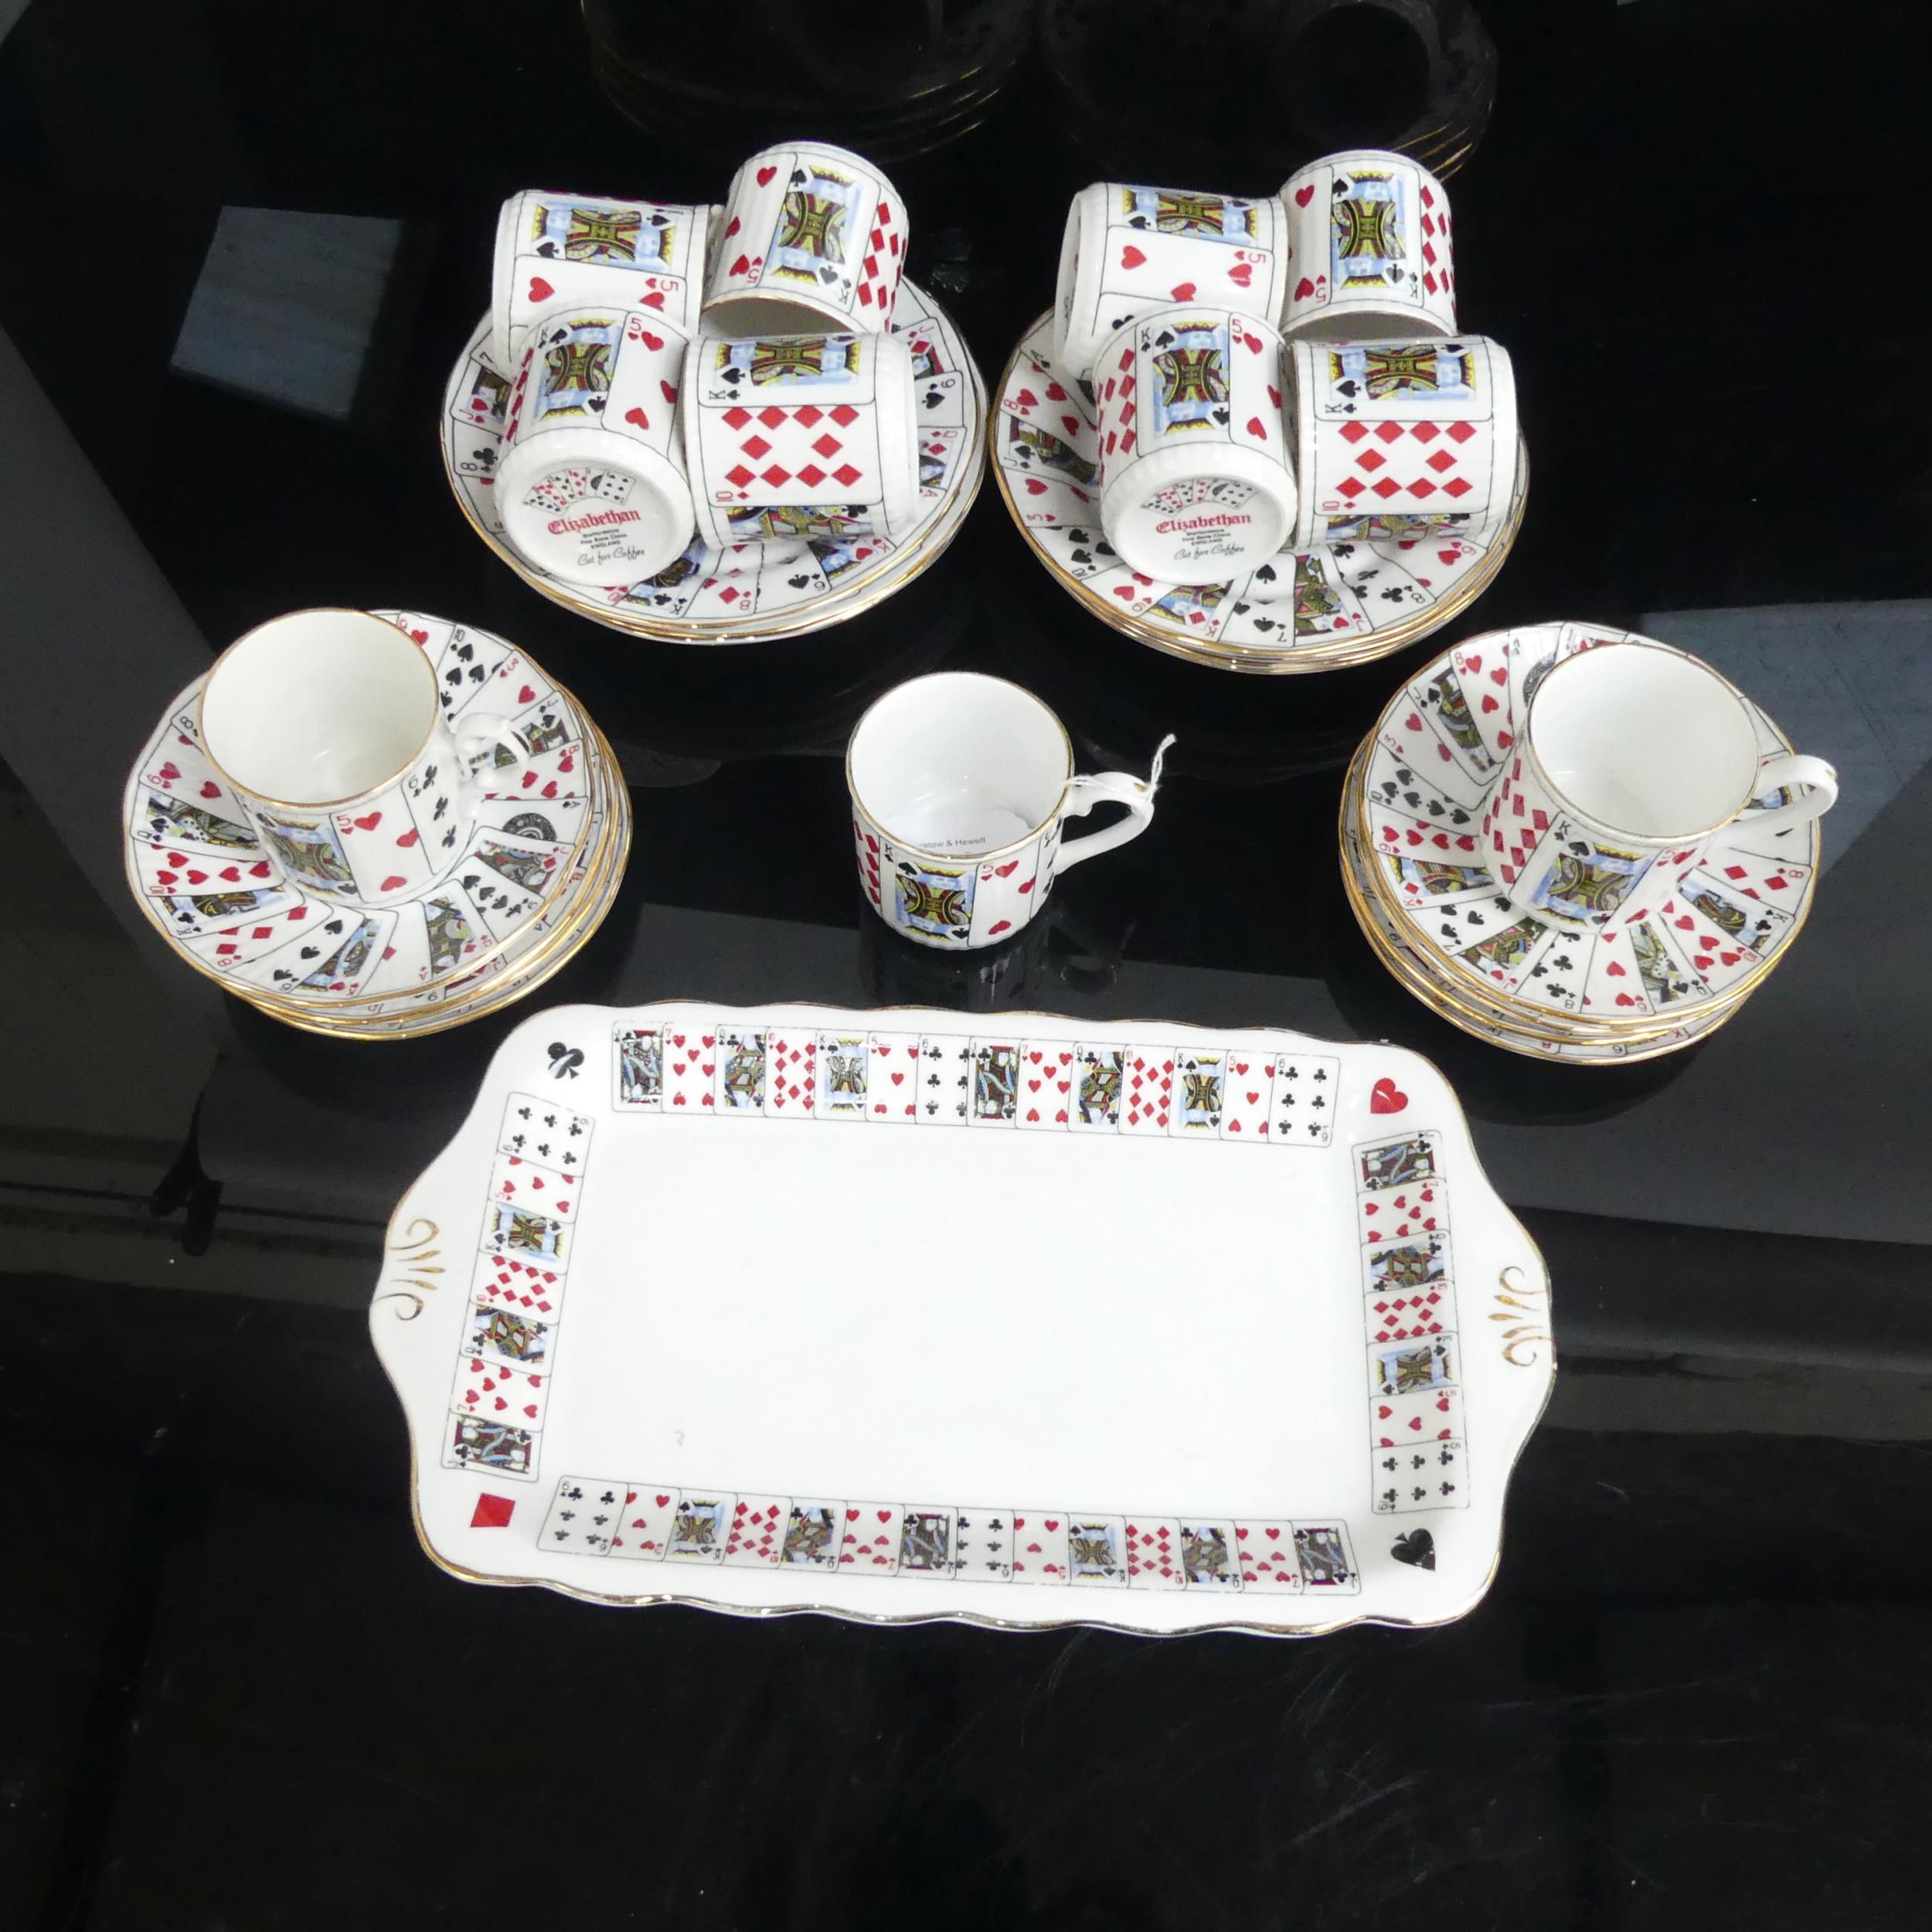 Elizabethan china "cut for coffee" cards design saucers and matching coffee cans, and a sandwich